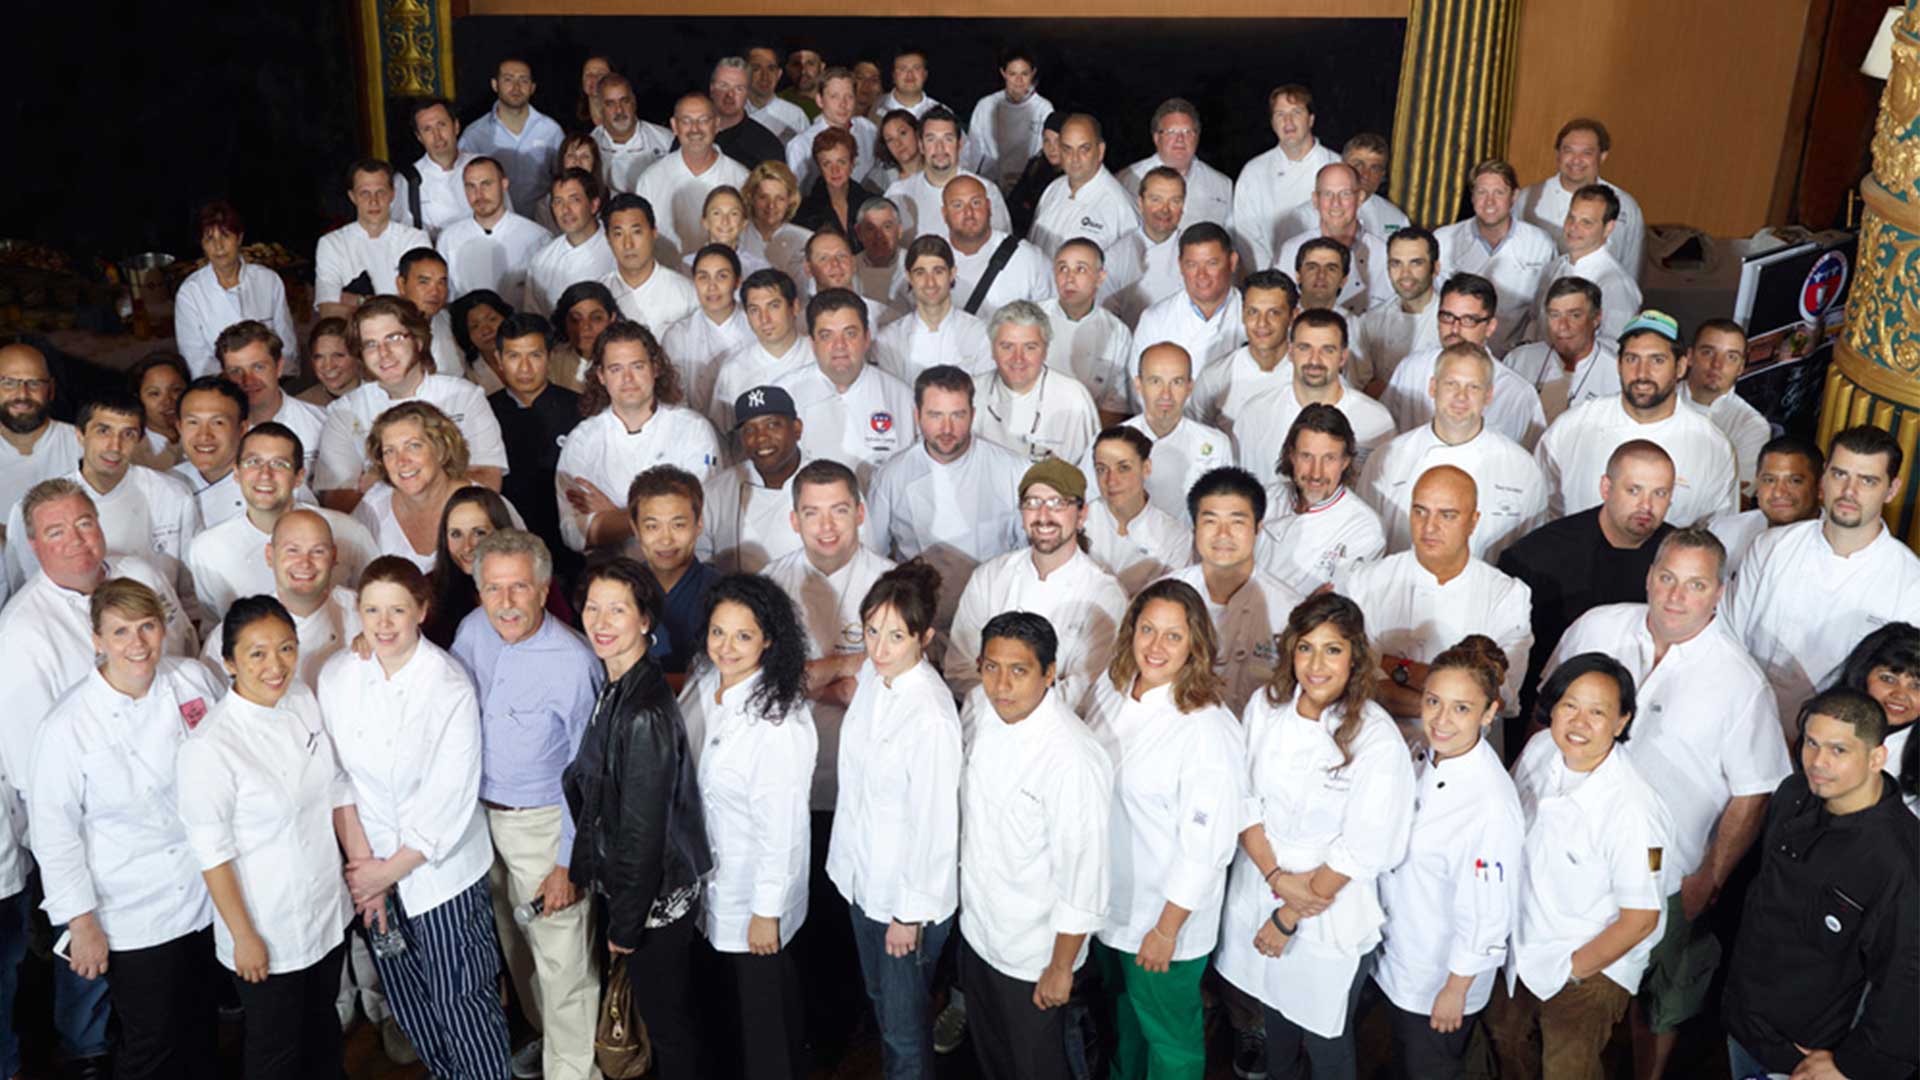 The Great Gathering of Chefs | The Chef's Connection